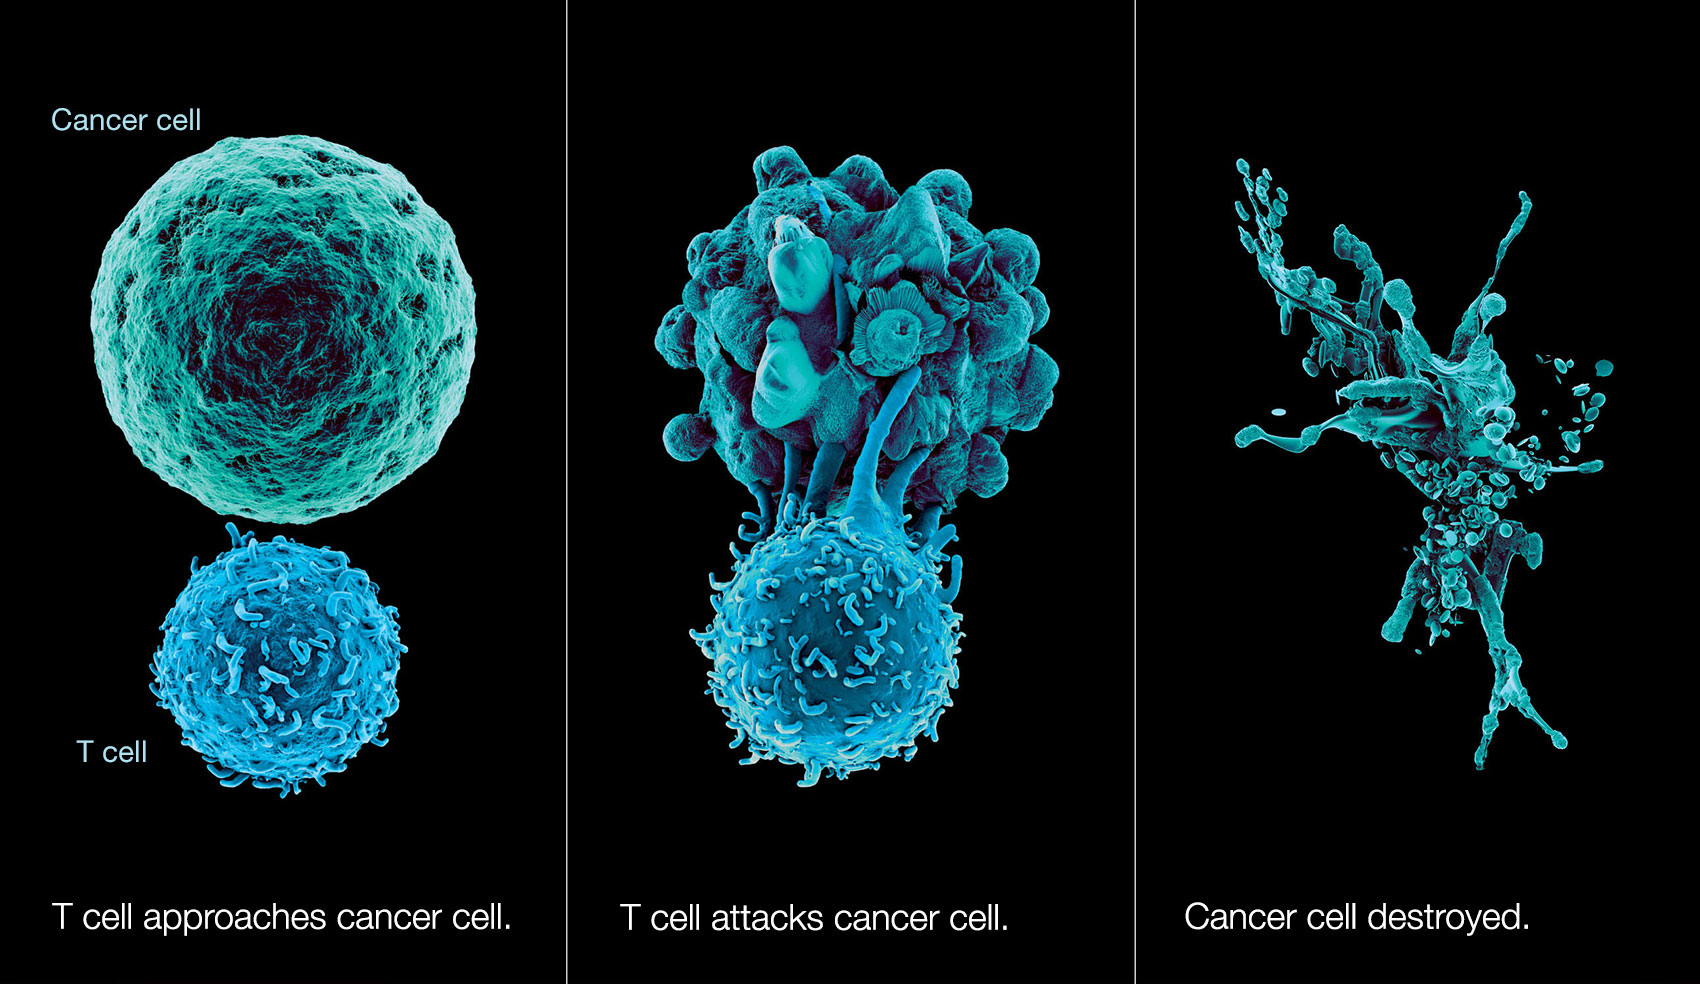 T cell destroying a cancer cell